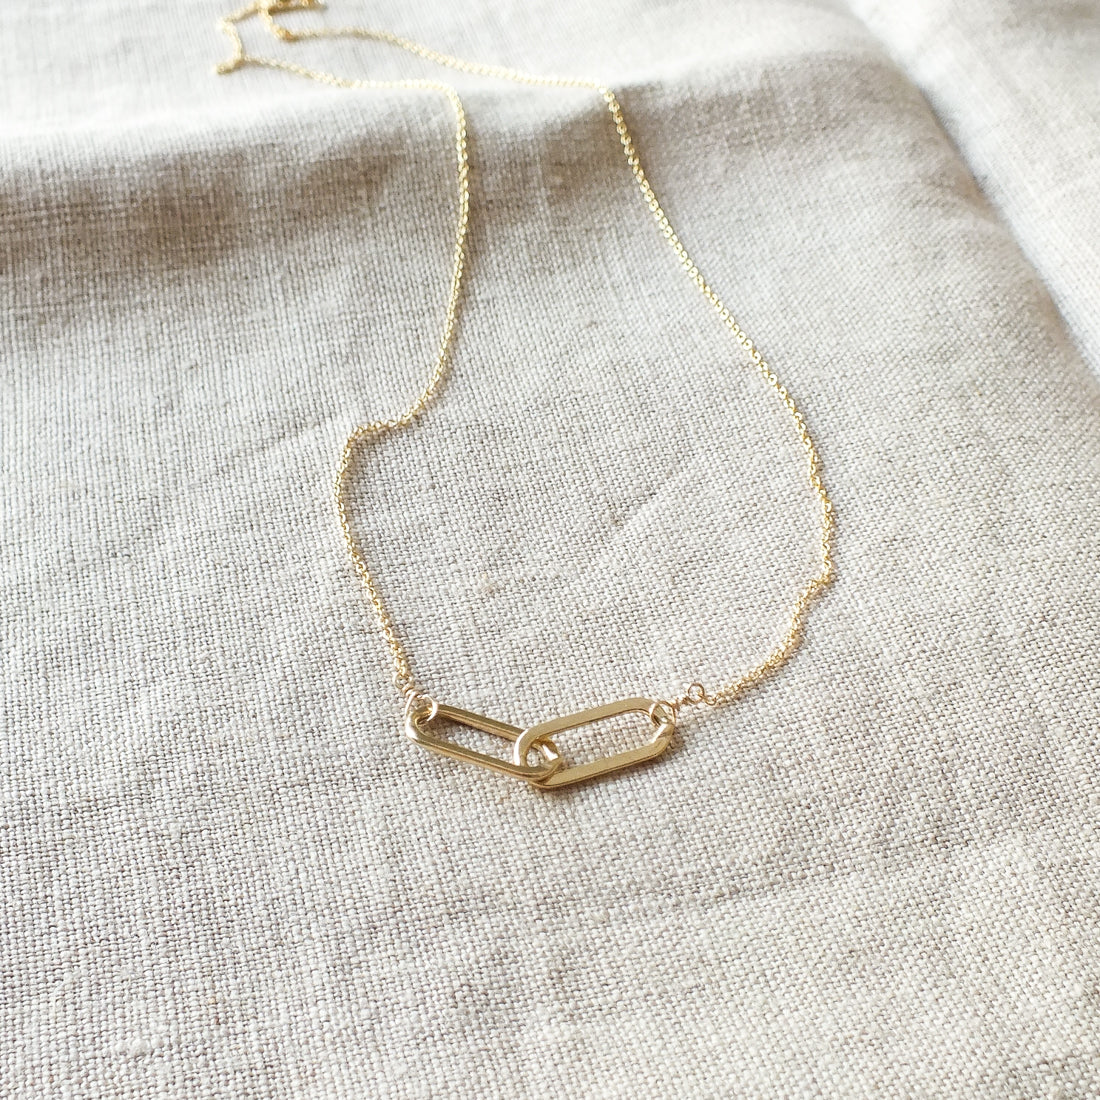 Linked Together Necklace by Becoming Jewelry